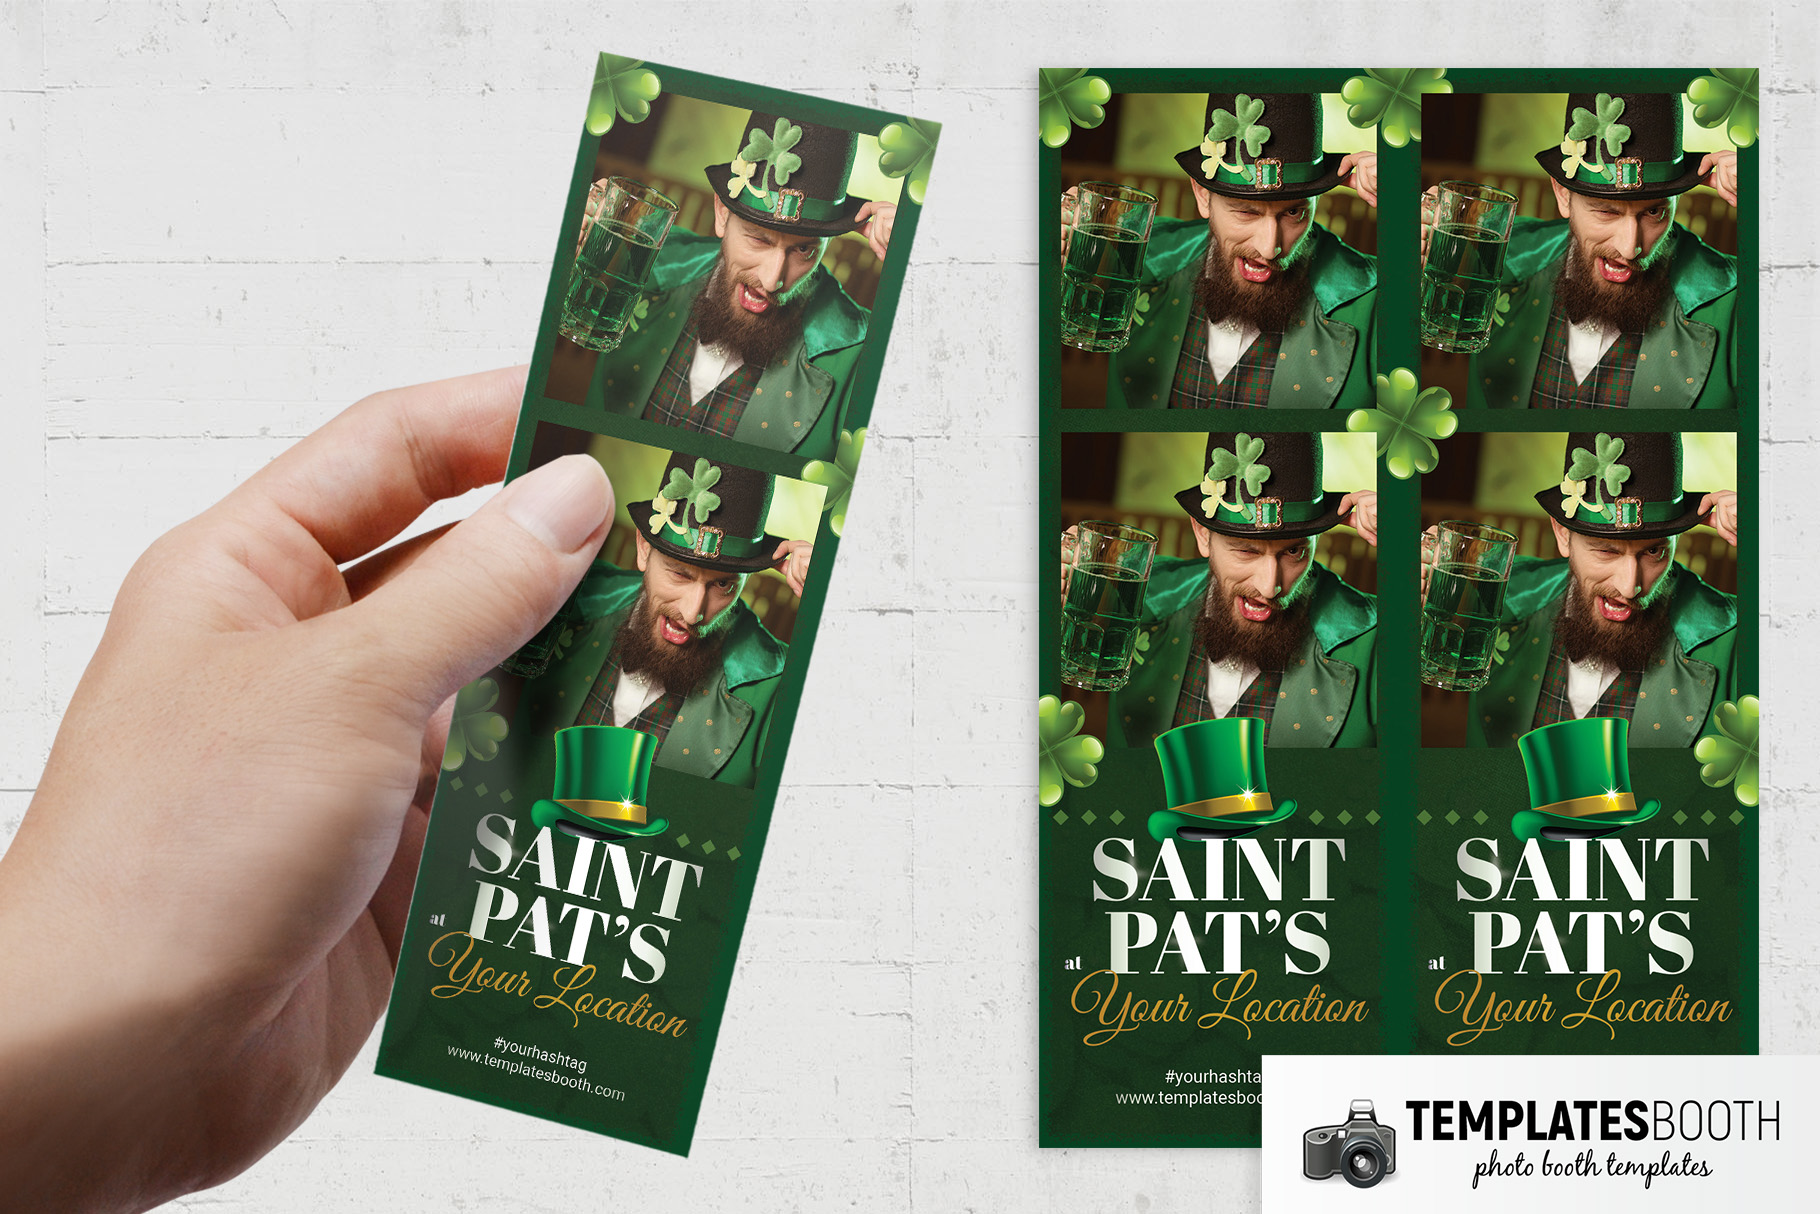 St Patrick Photo Booth Template